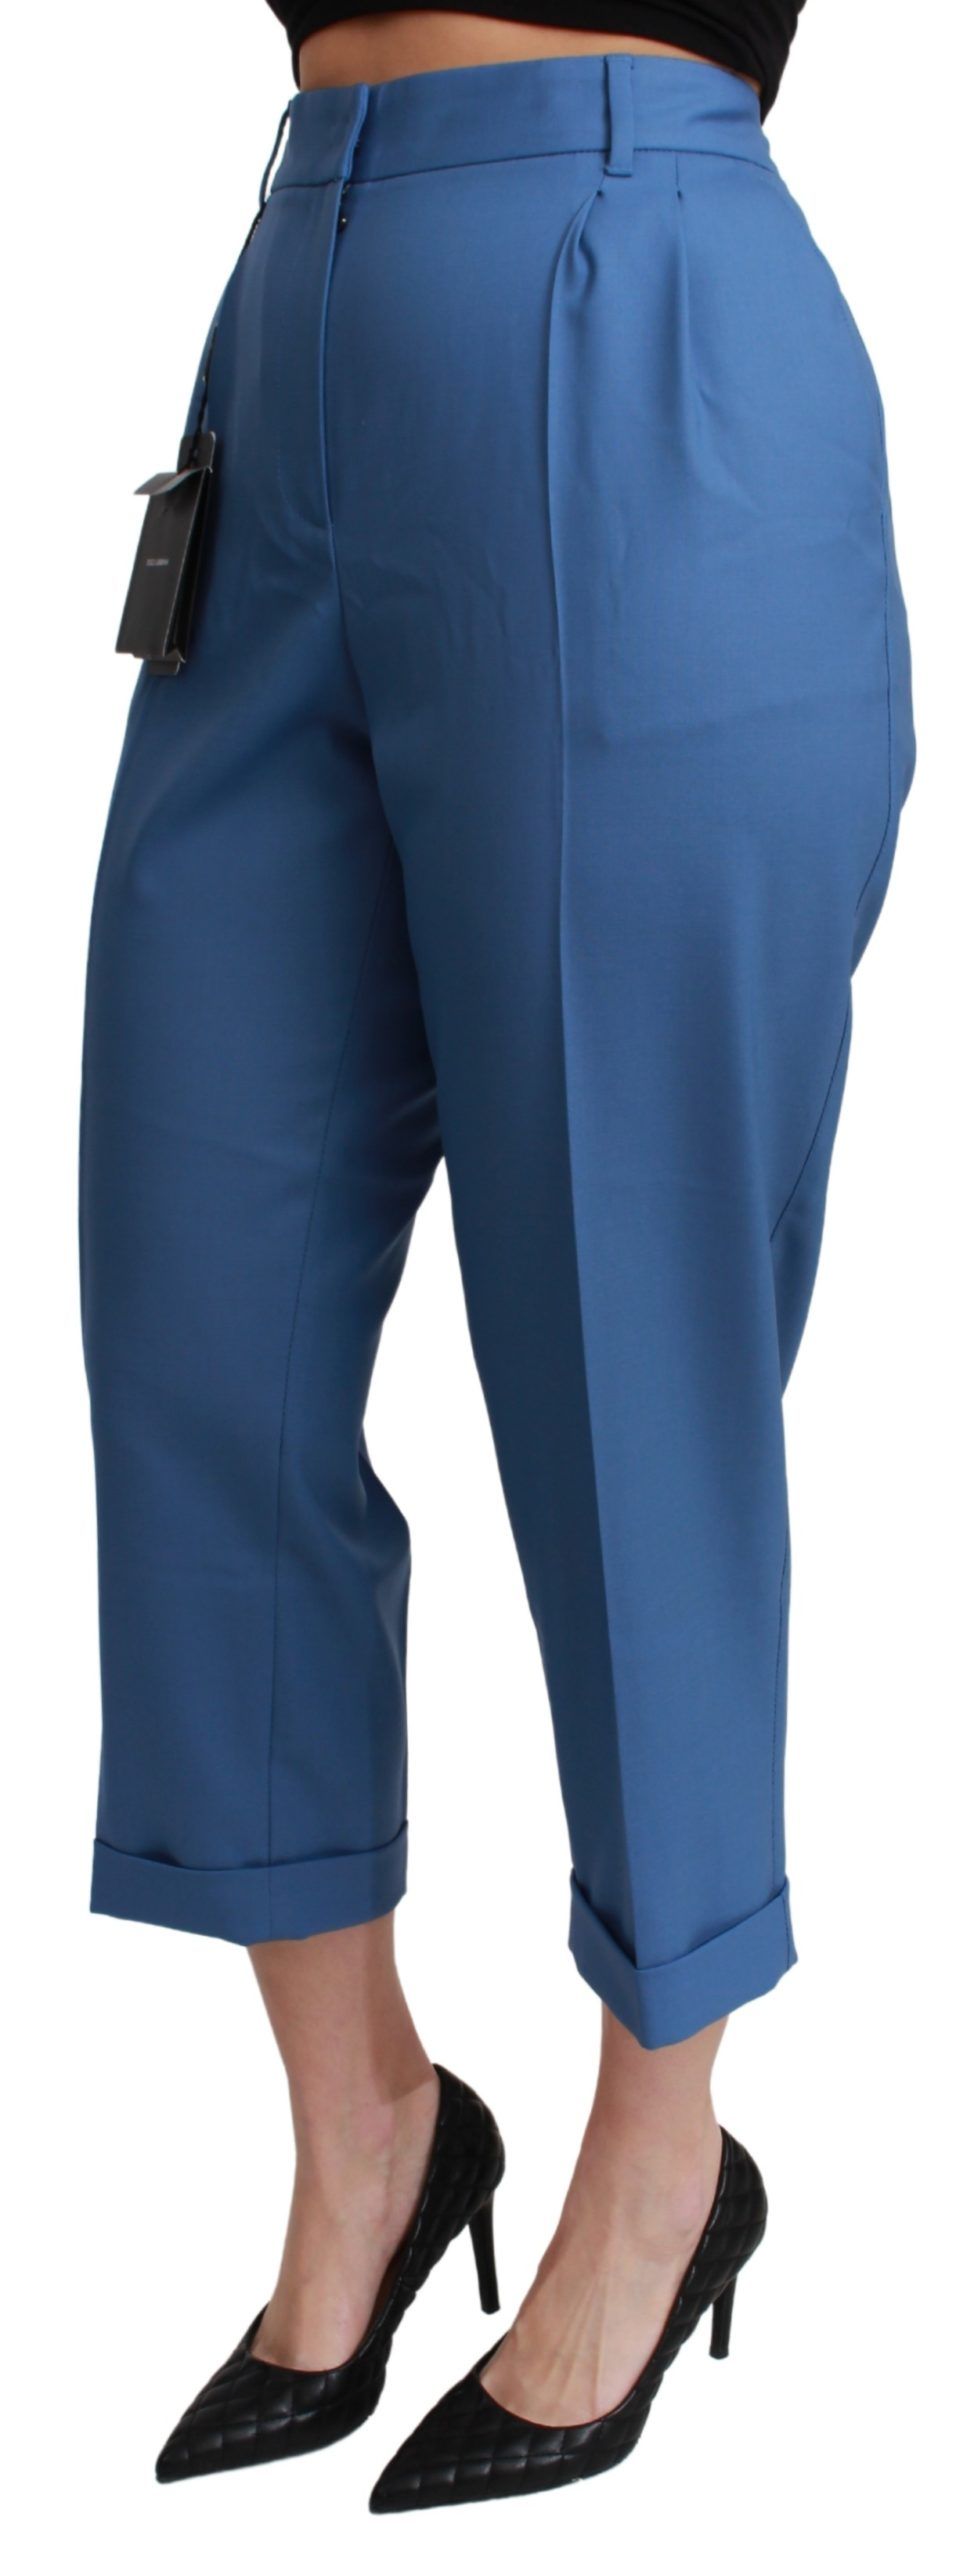 Dolce & Gabbana Blue Pleated Wool Cuffed Cropped Trouser Pants - Gio Beverly Hills